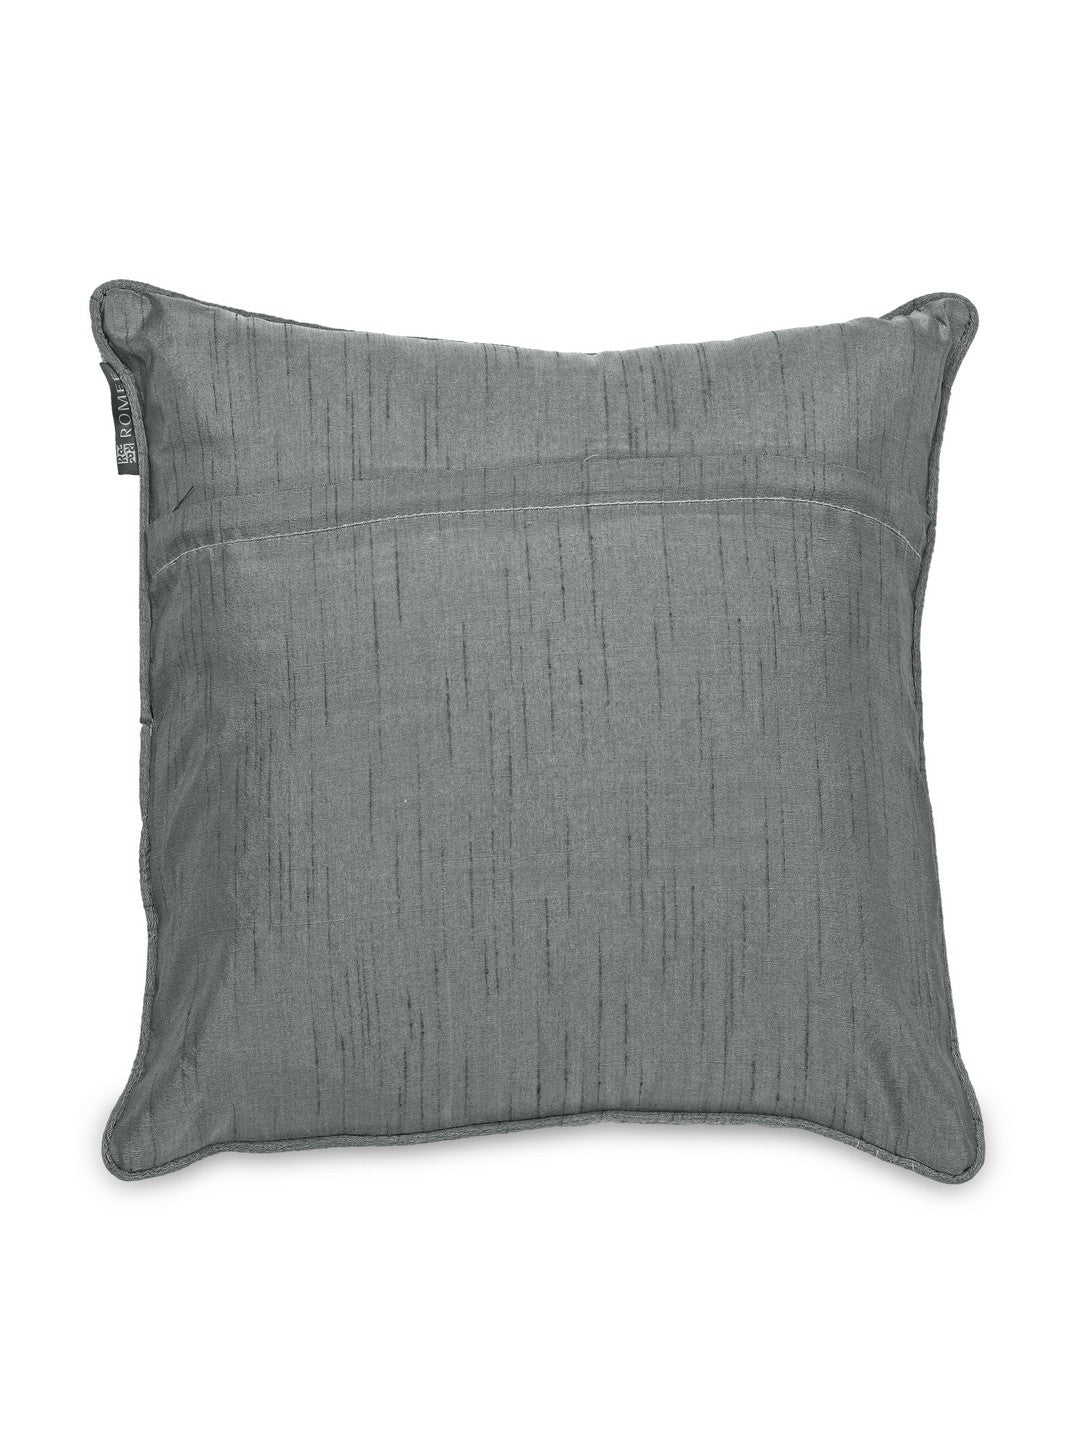 Cotton Chenille Fabric Albert Cushion Cover (Grey, 16 x 16-inches) - Set of 5